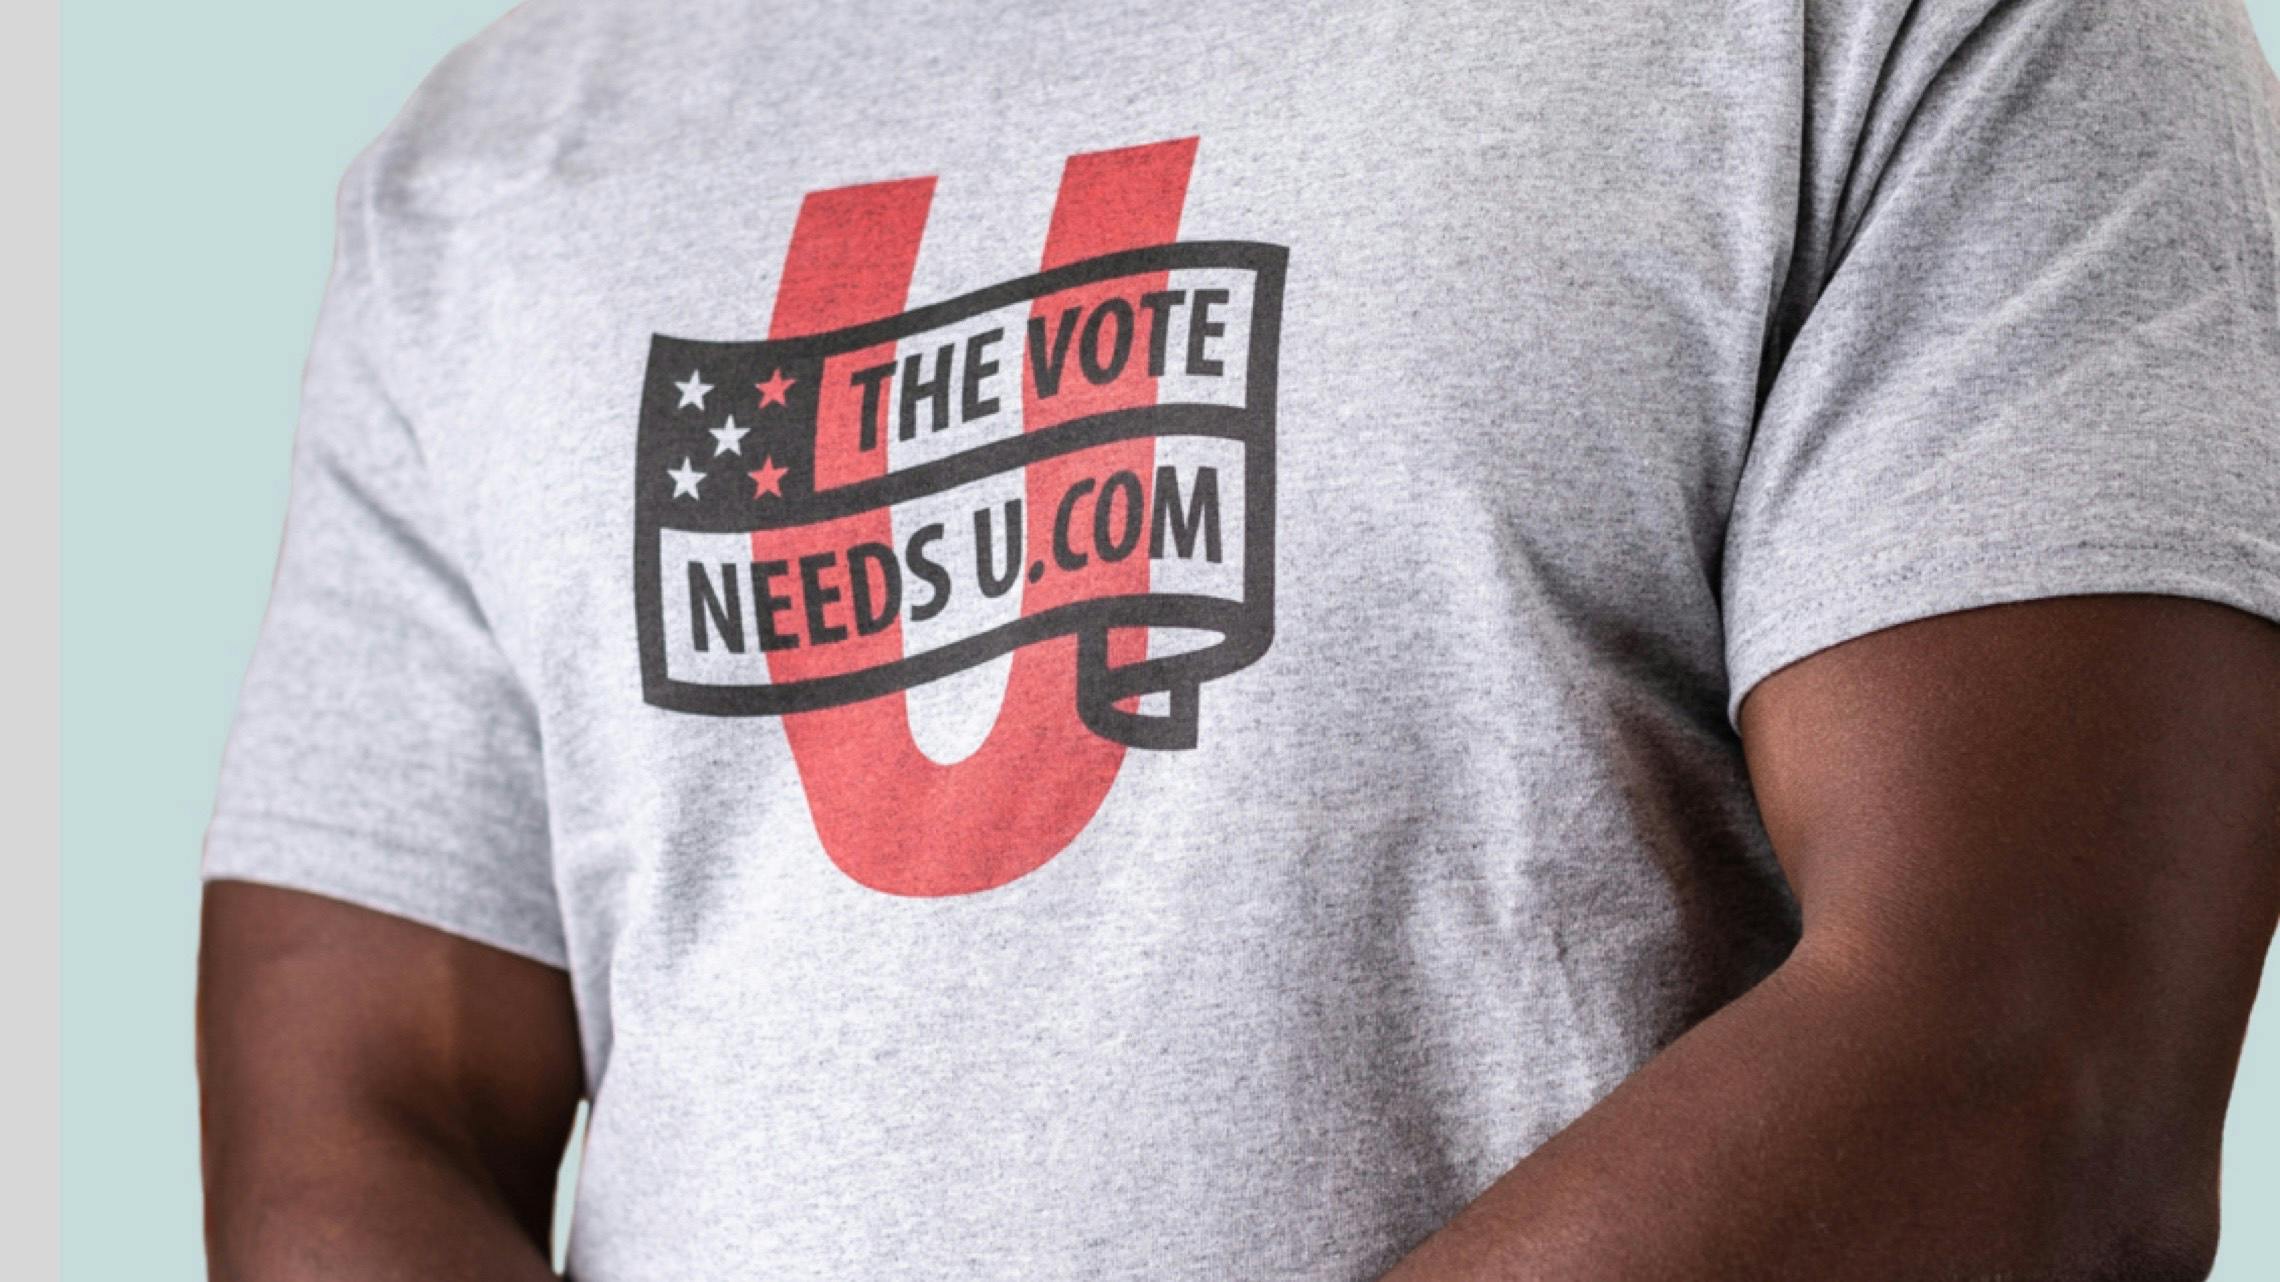 Photograph of a man wearing a "The Vote Needs U" shirt.